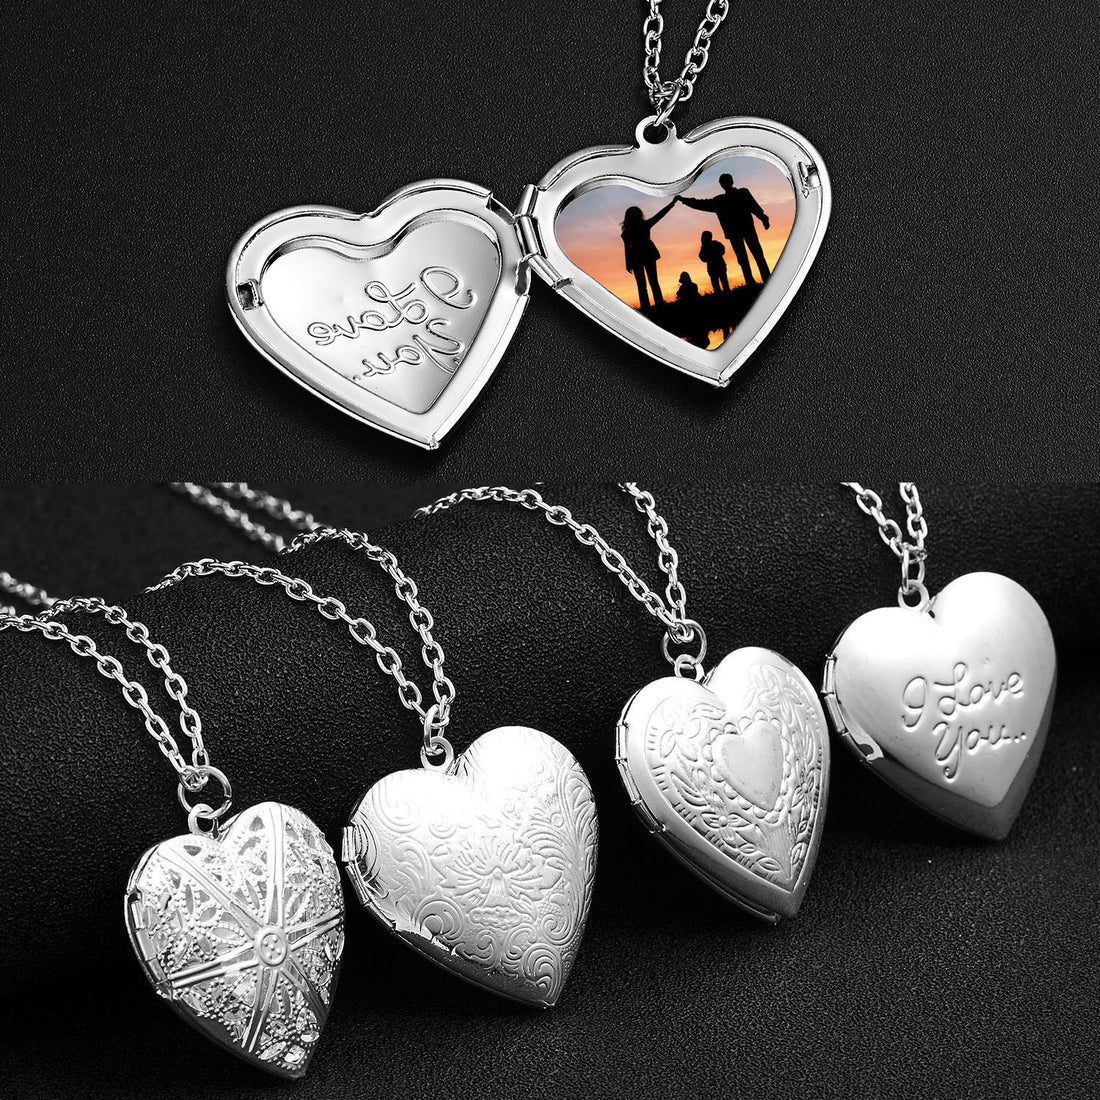 Carved Design Love Necklace Personalized Heart-shaped Photo Frame Pendant Necklace For Women Family Jewelry For Valentine&